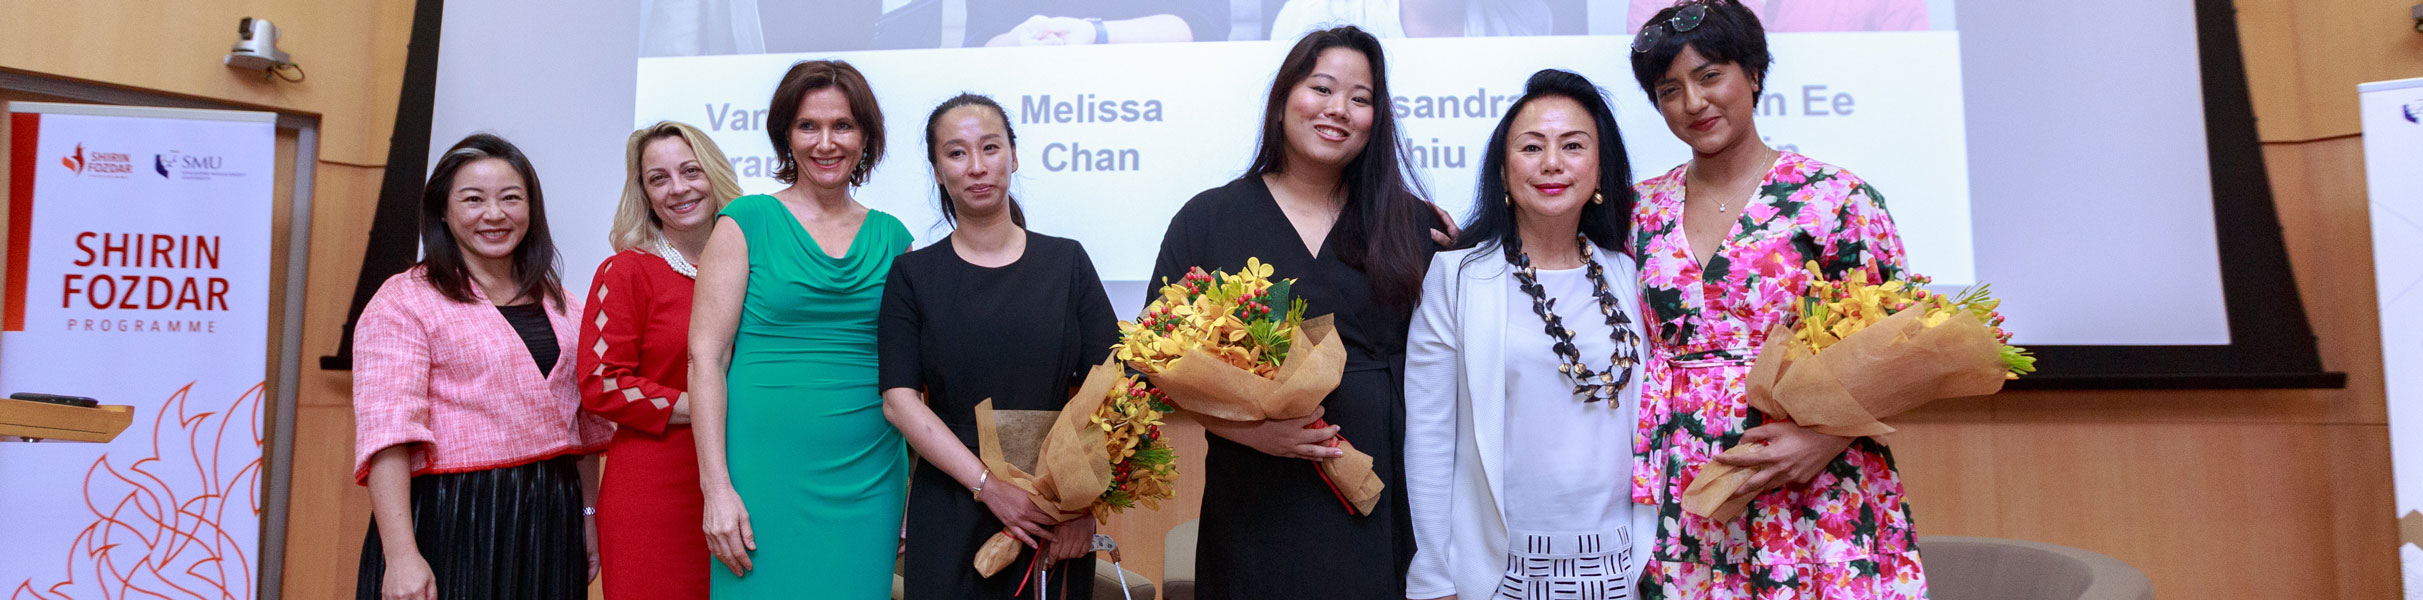 Shirin Fozdar Programme (SFP) Board Member Ms Chan Ee Lin; Director, Lien Centre for Social Innovation Ms Christy Davis; author and international speaker Ms Margie Warrell; Ms Cassandra Chiu; Ms Melissa Chan; SFP Chairperson Ms Claire Chiang and Ms Vanessa Paranjothy at the SFP Annual Lecture 2019.